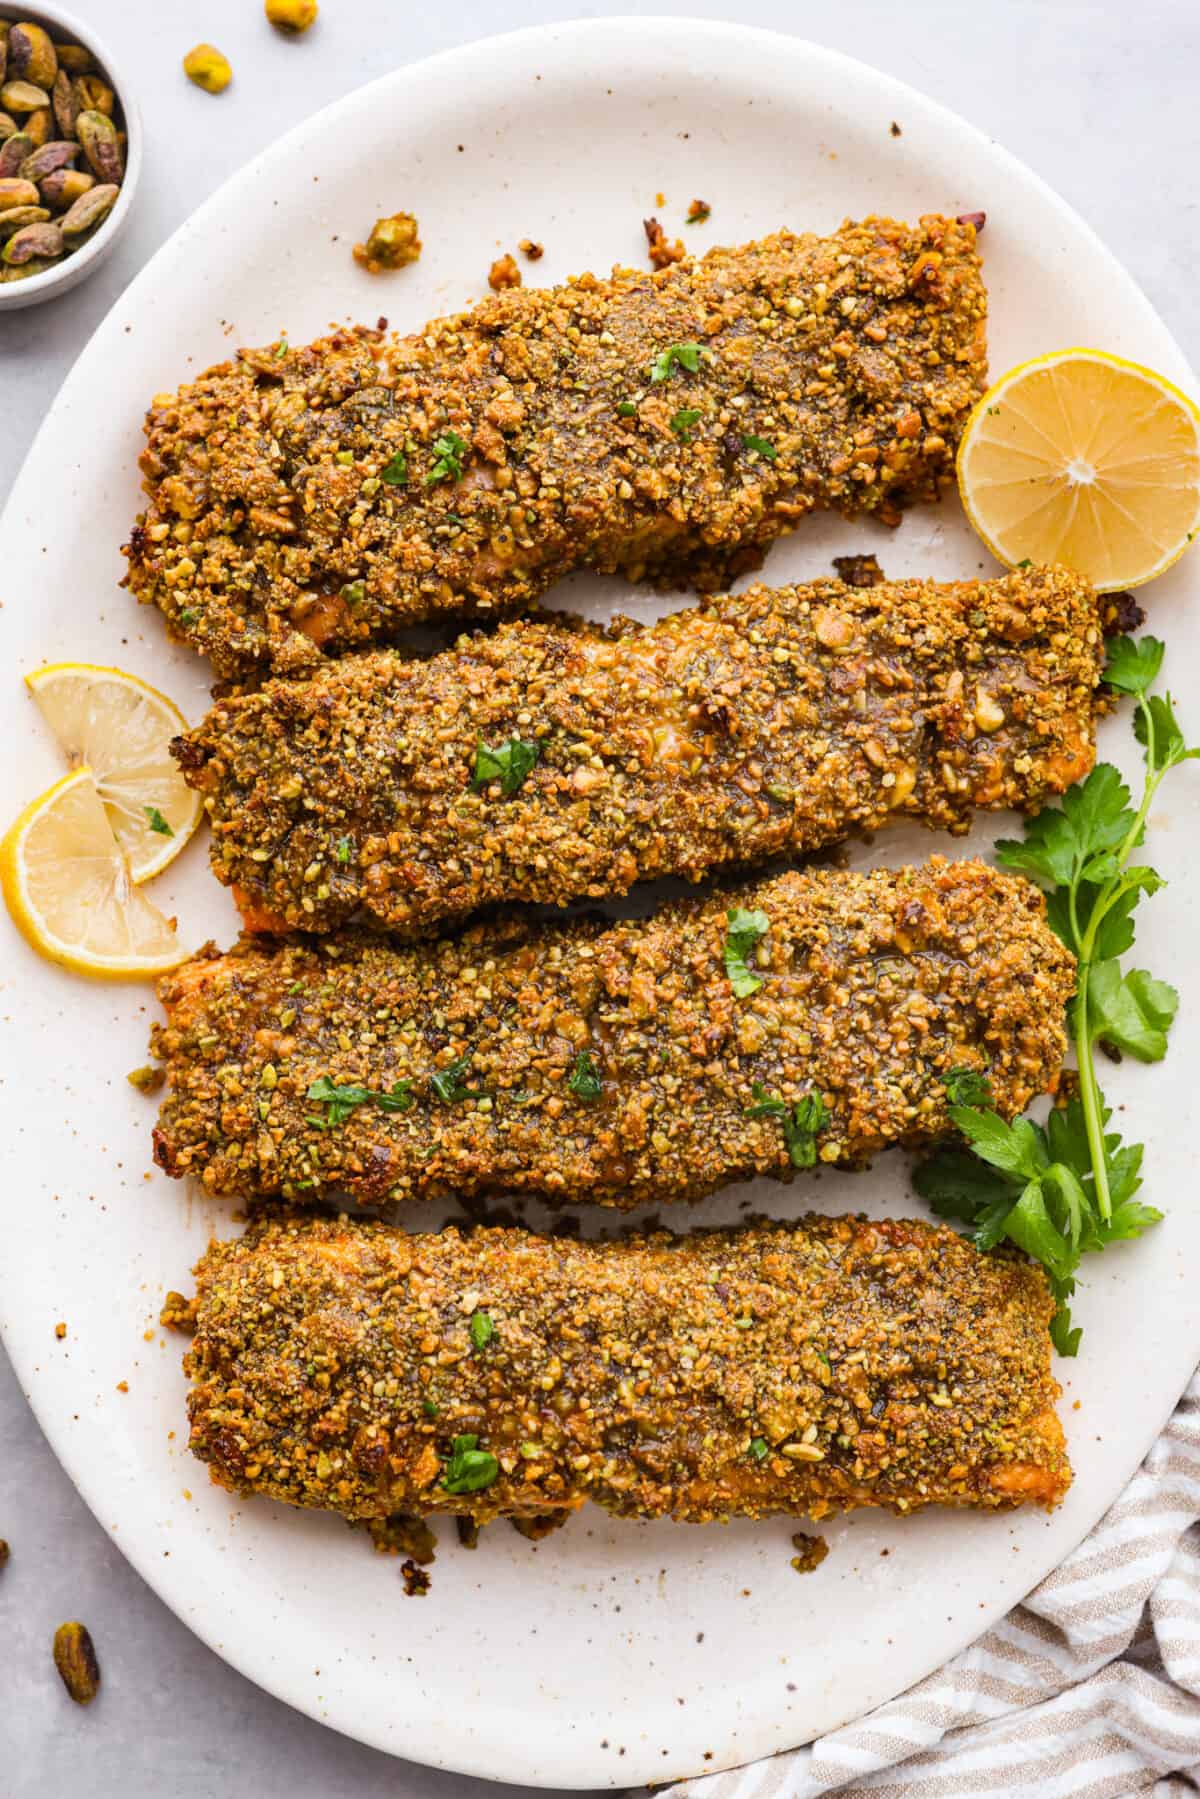 4 pistachio crusted salmon filets on a white plate, garnished with lemon.